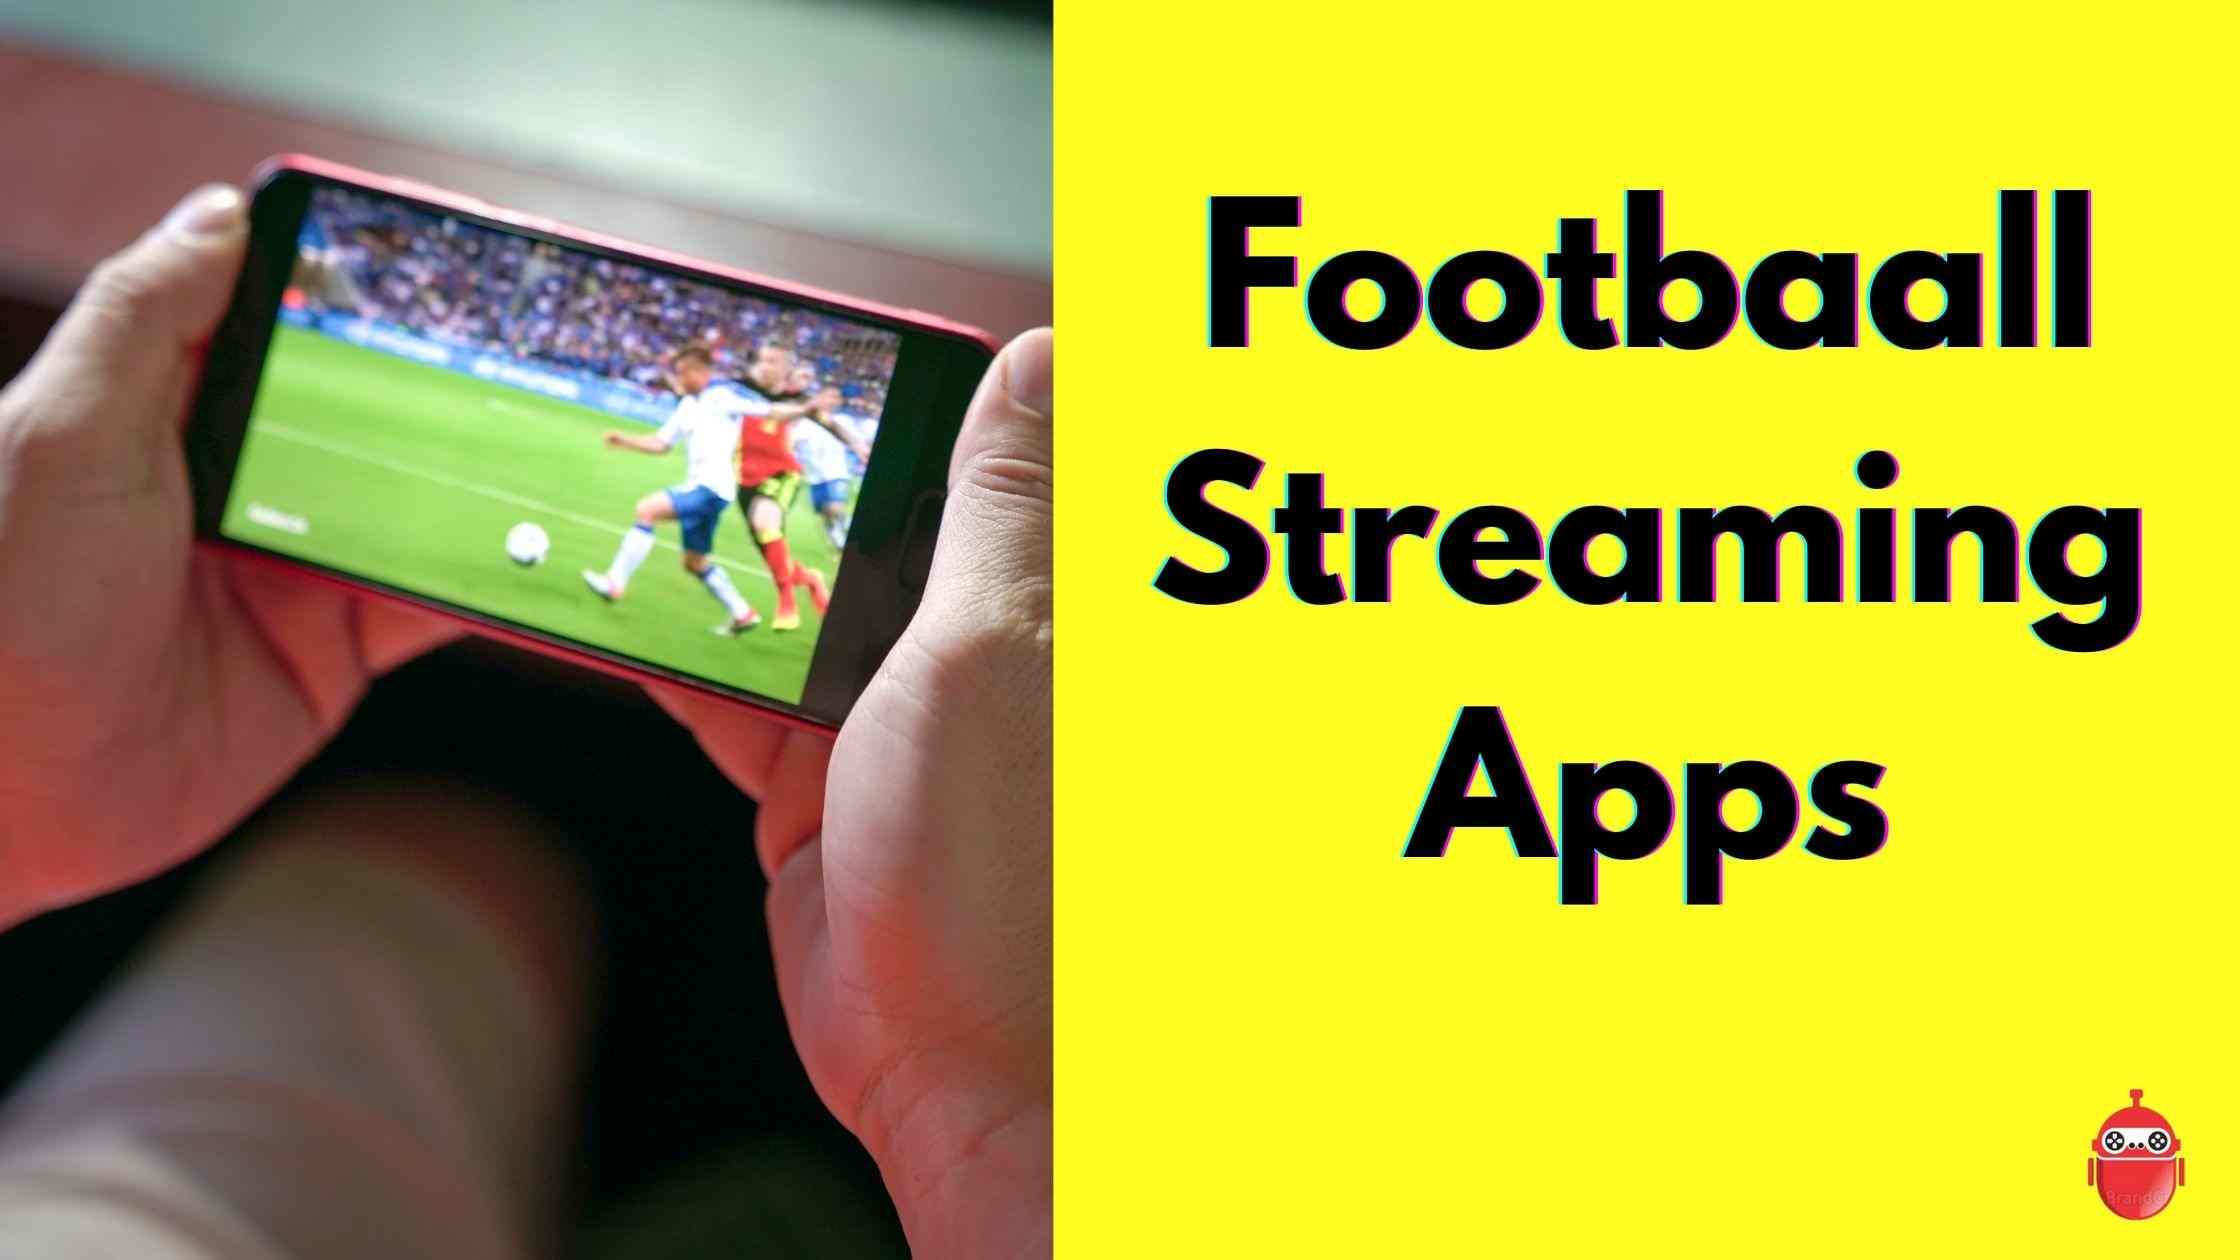 10 Best Football Streaming Apps for Android And iPhone